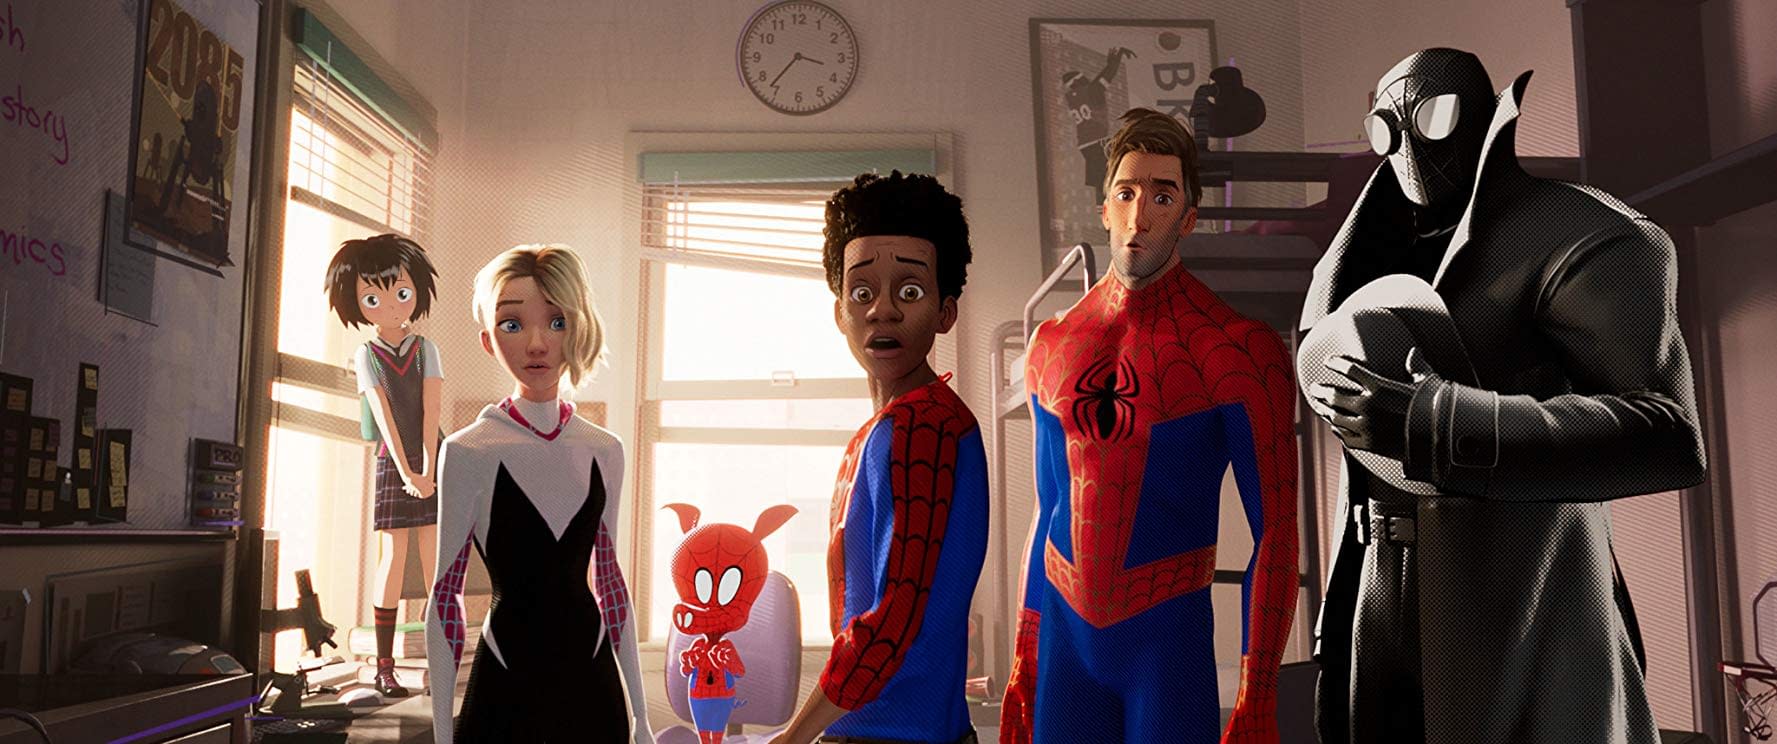 First Details for the Spider-Man: Into the Spider-Verse Sequel and Spin-Off are Confirmed